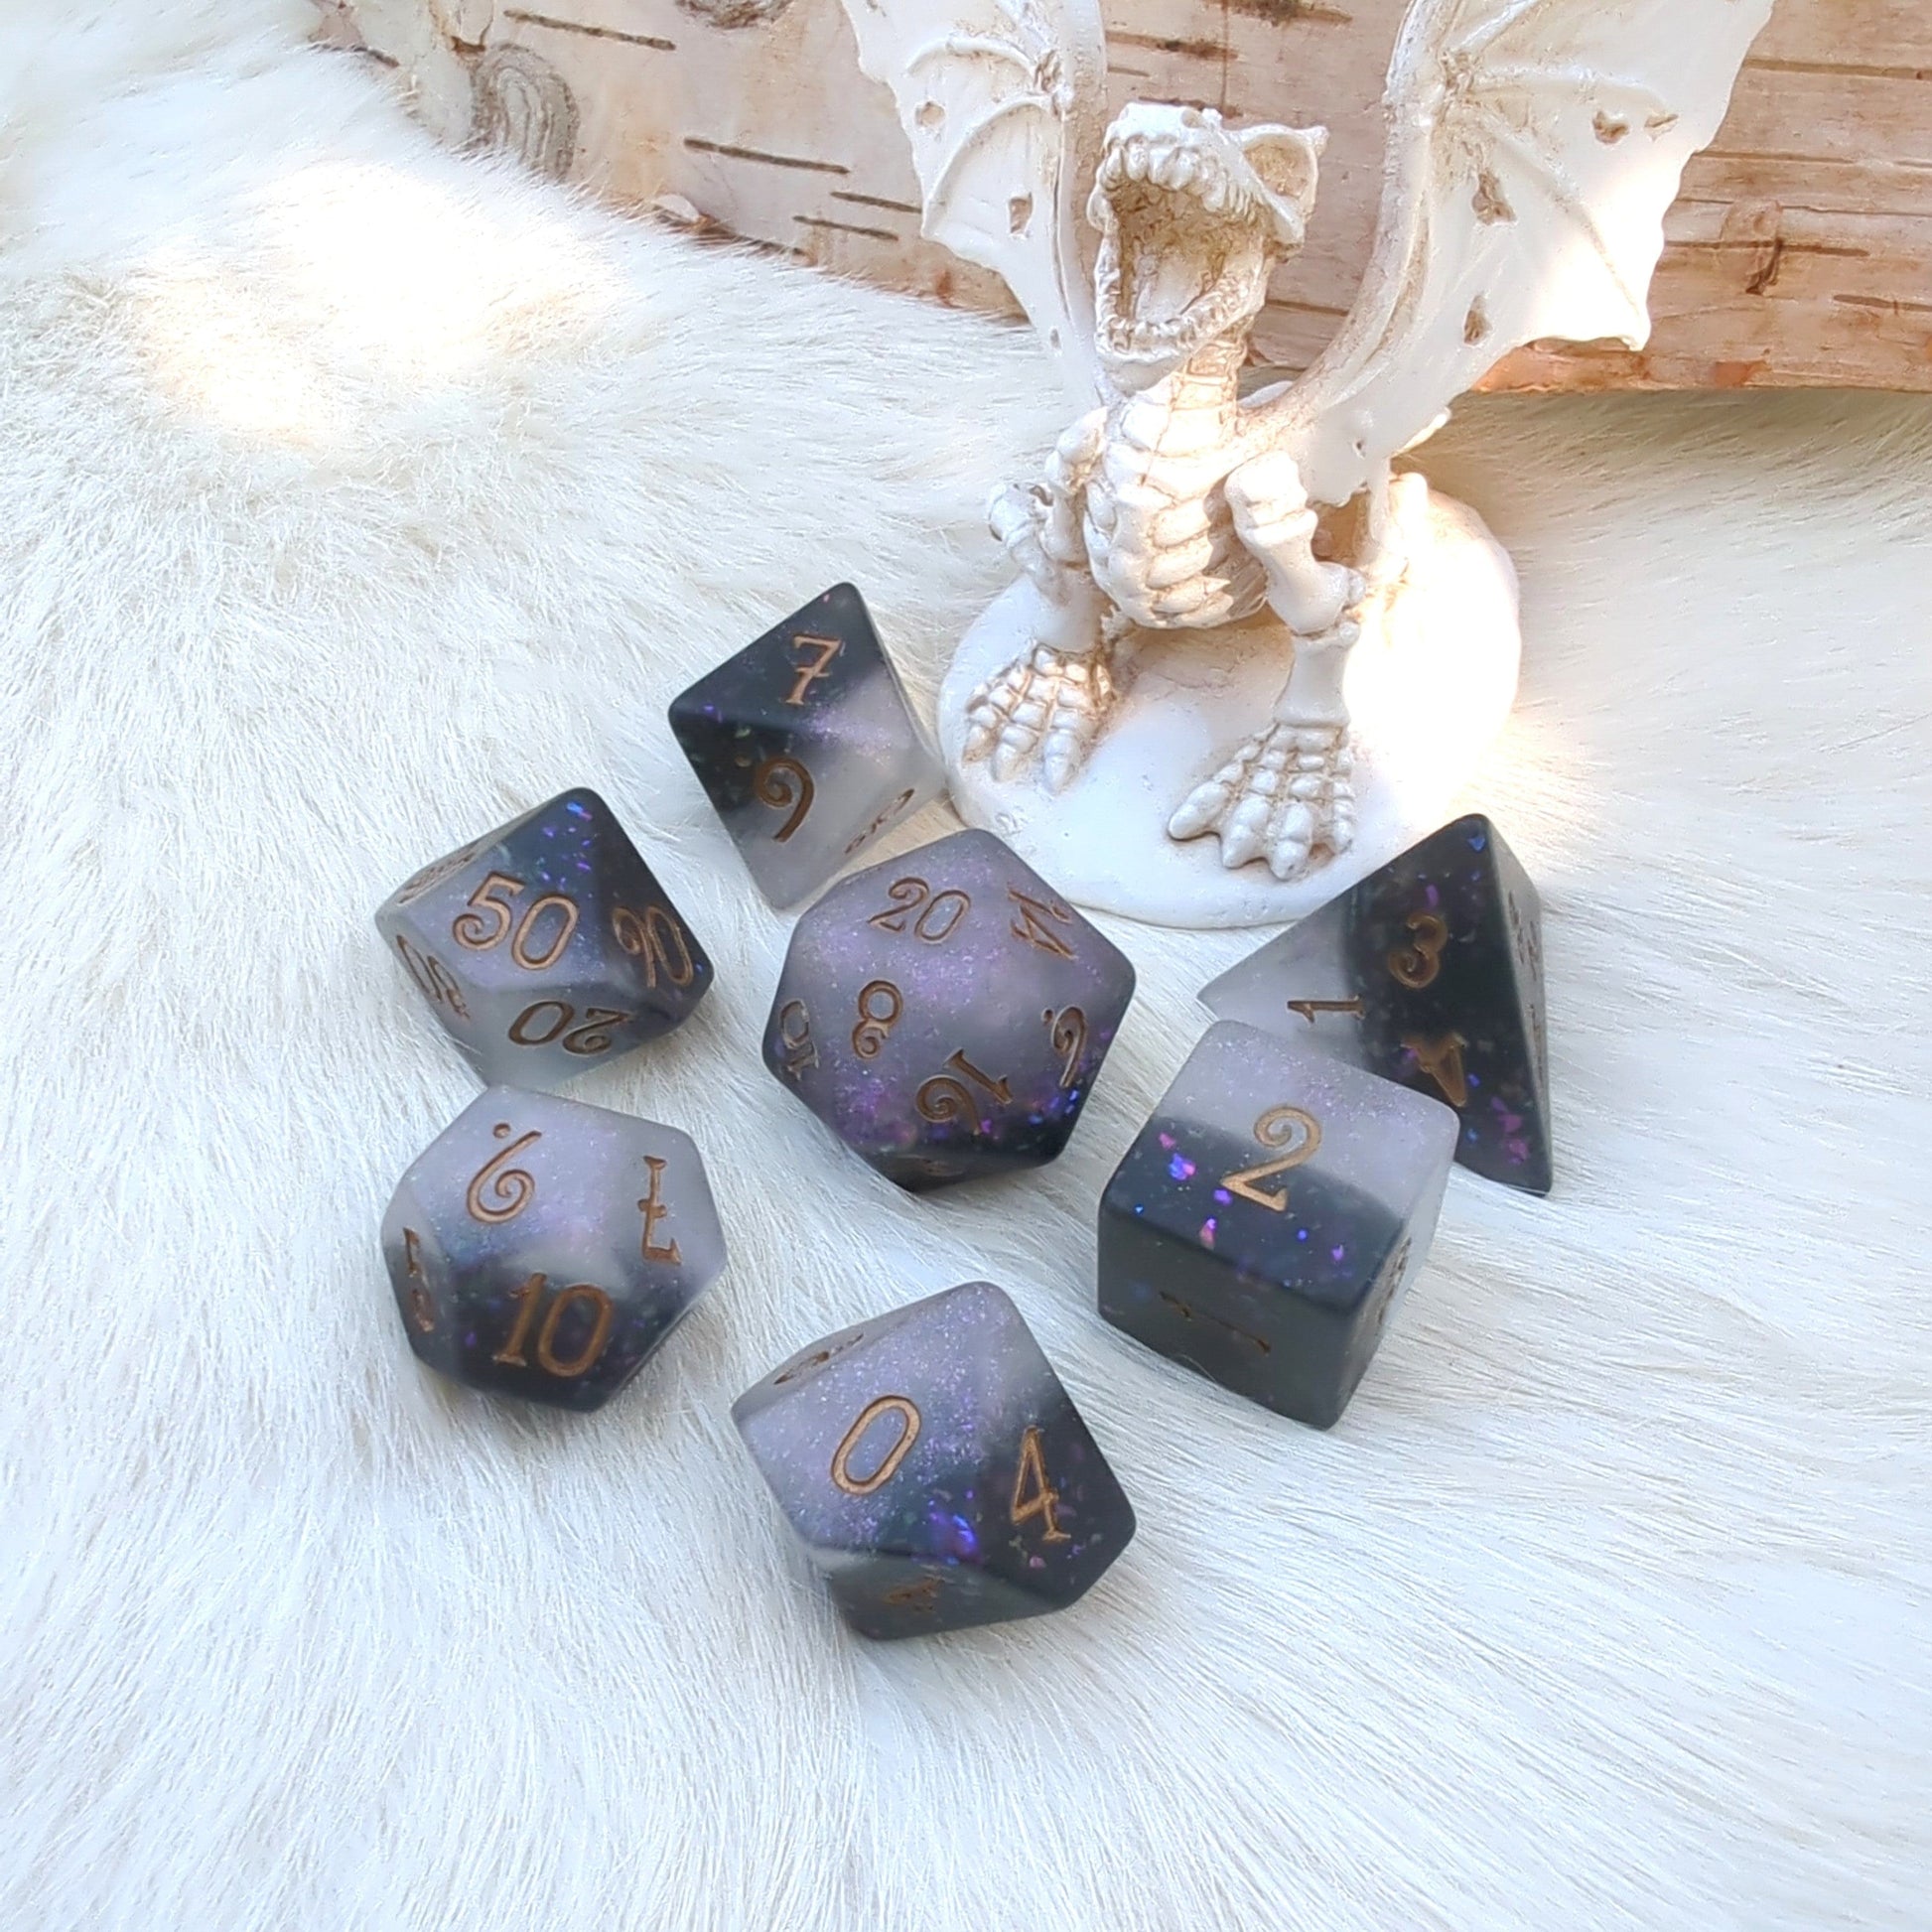 Light and Dark 7 Piece Dice Set. Black and White Frosted Dice.